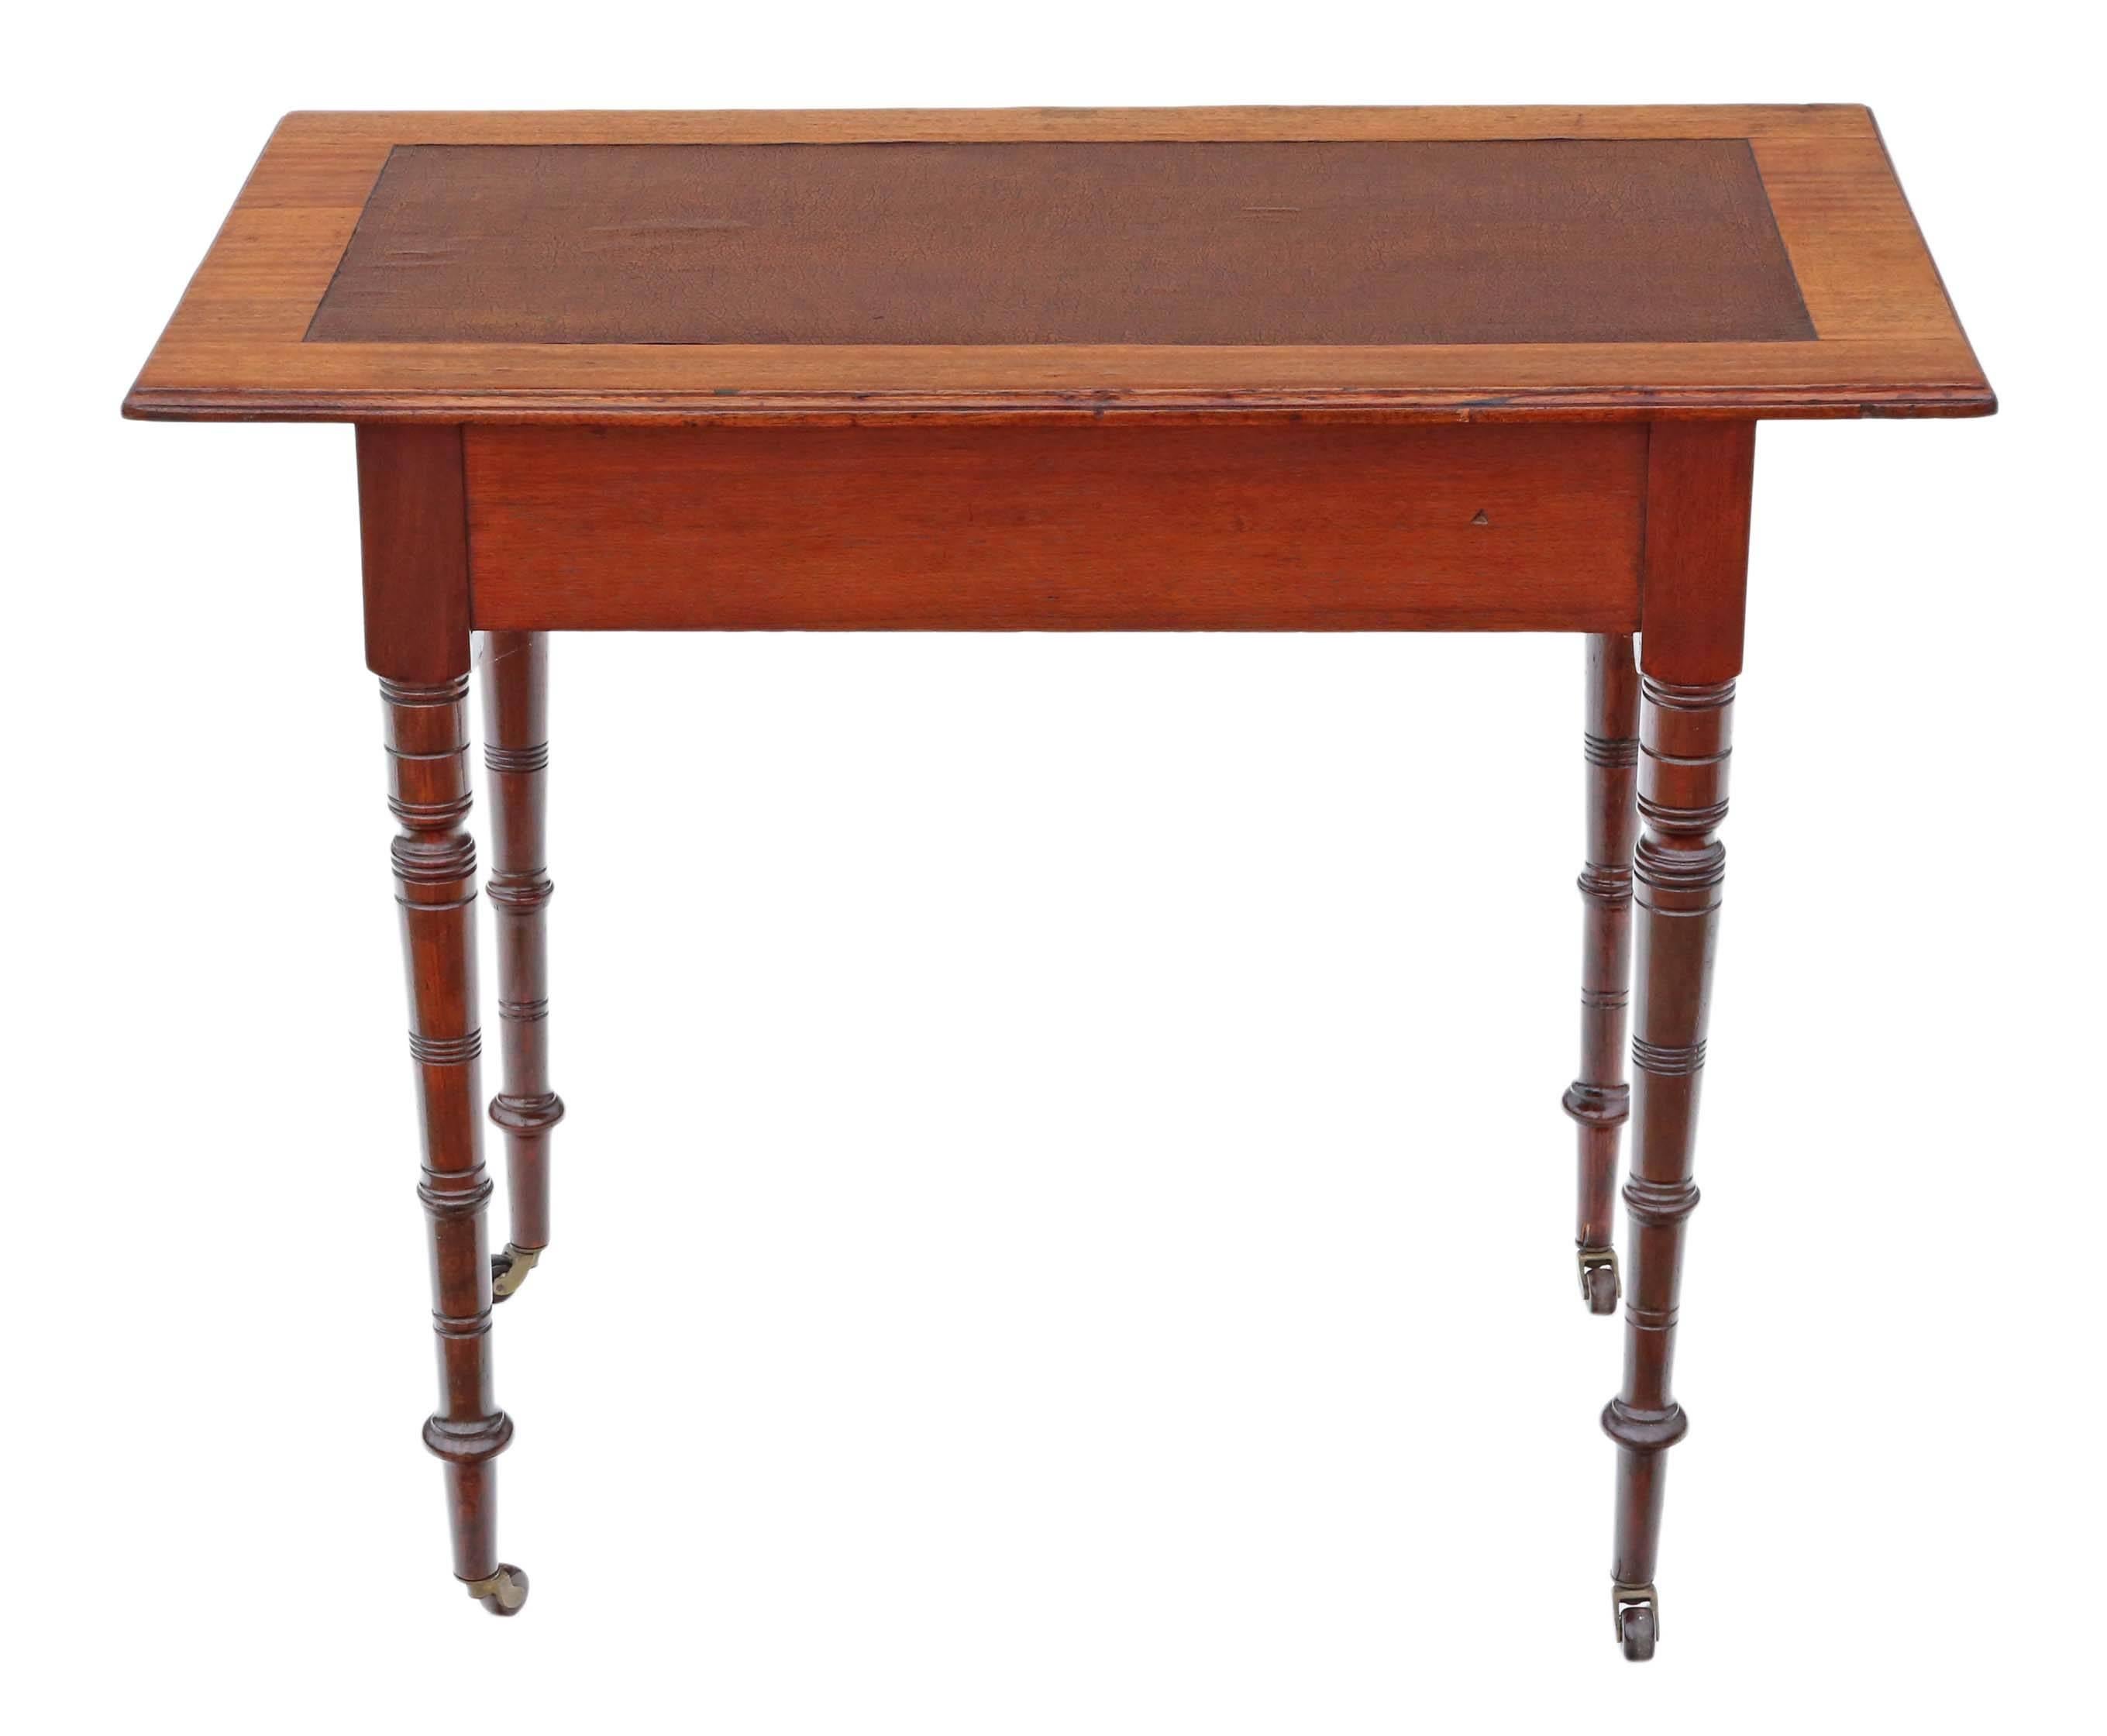 Antique Late Victorian circa 1900 Mahogany Desk or Writing Table 4